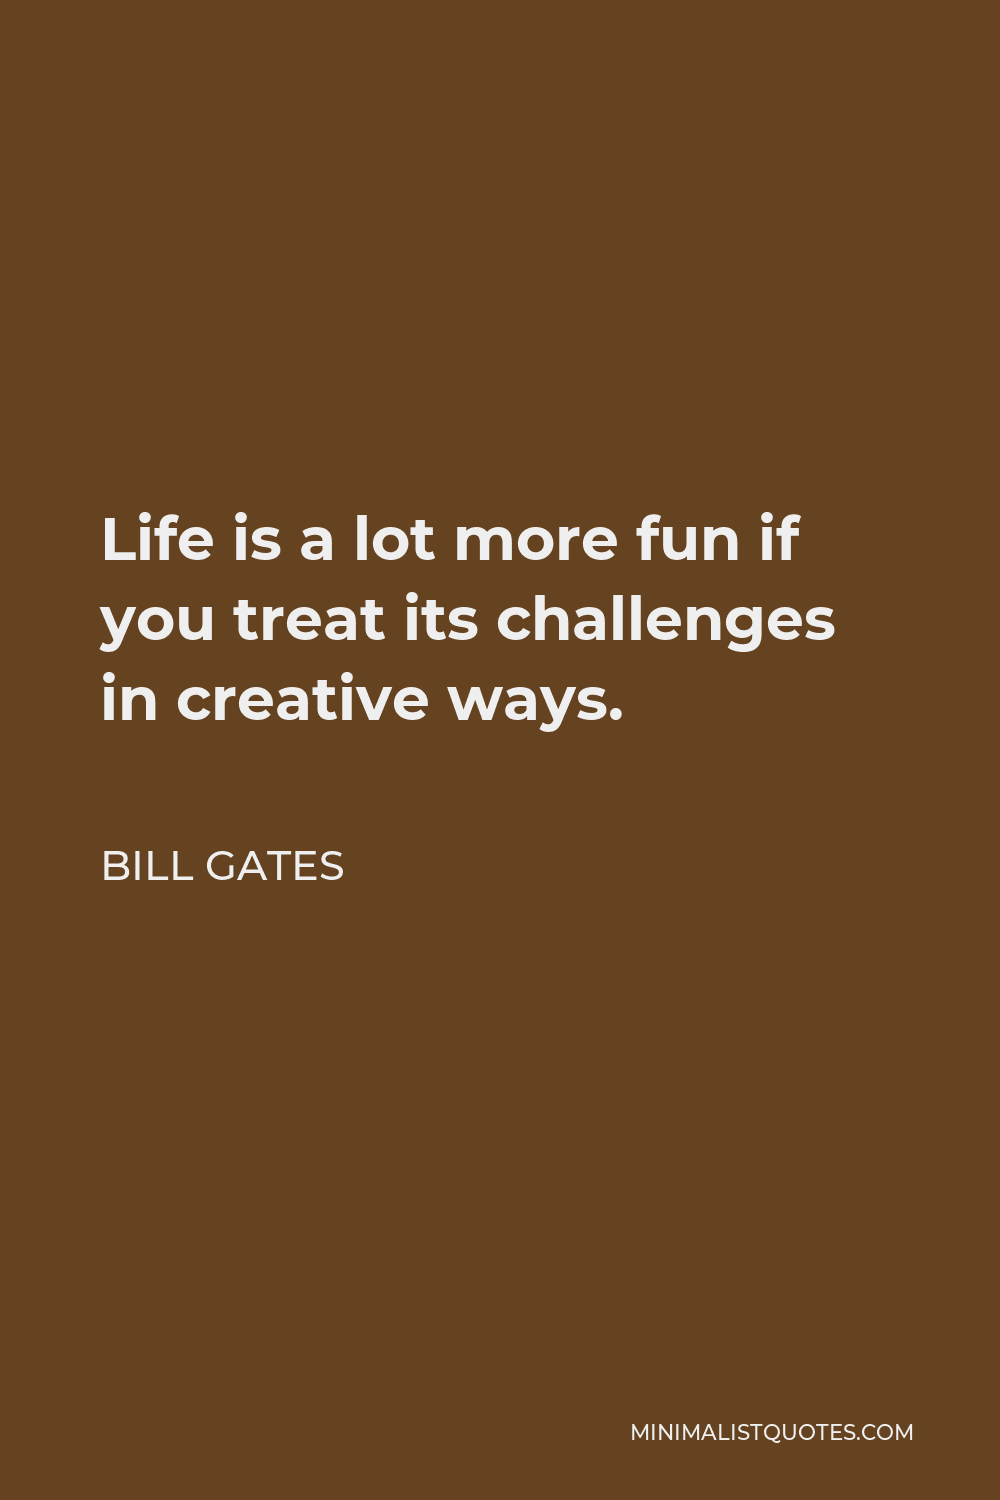 Bill Gates Quote - Life is a lot more fun if you treat its challenges in creative ways.